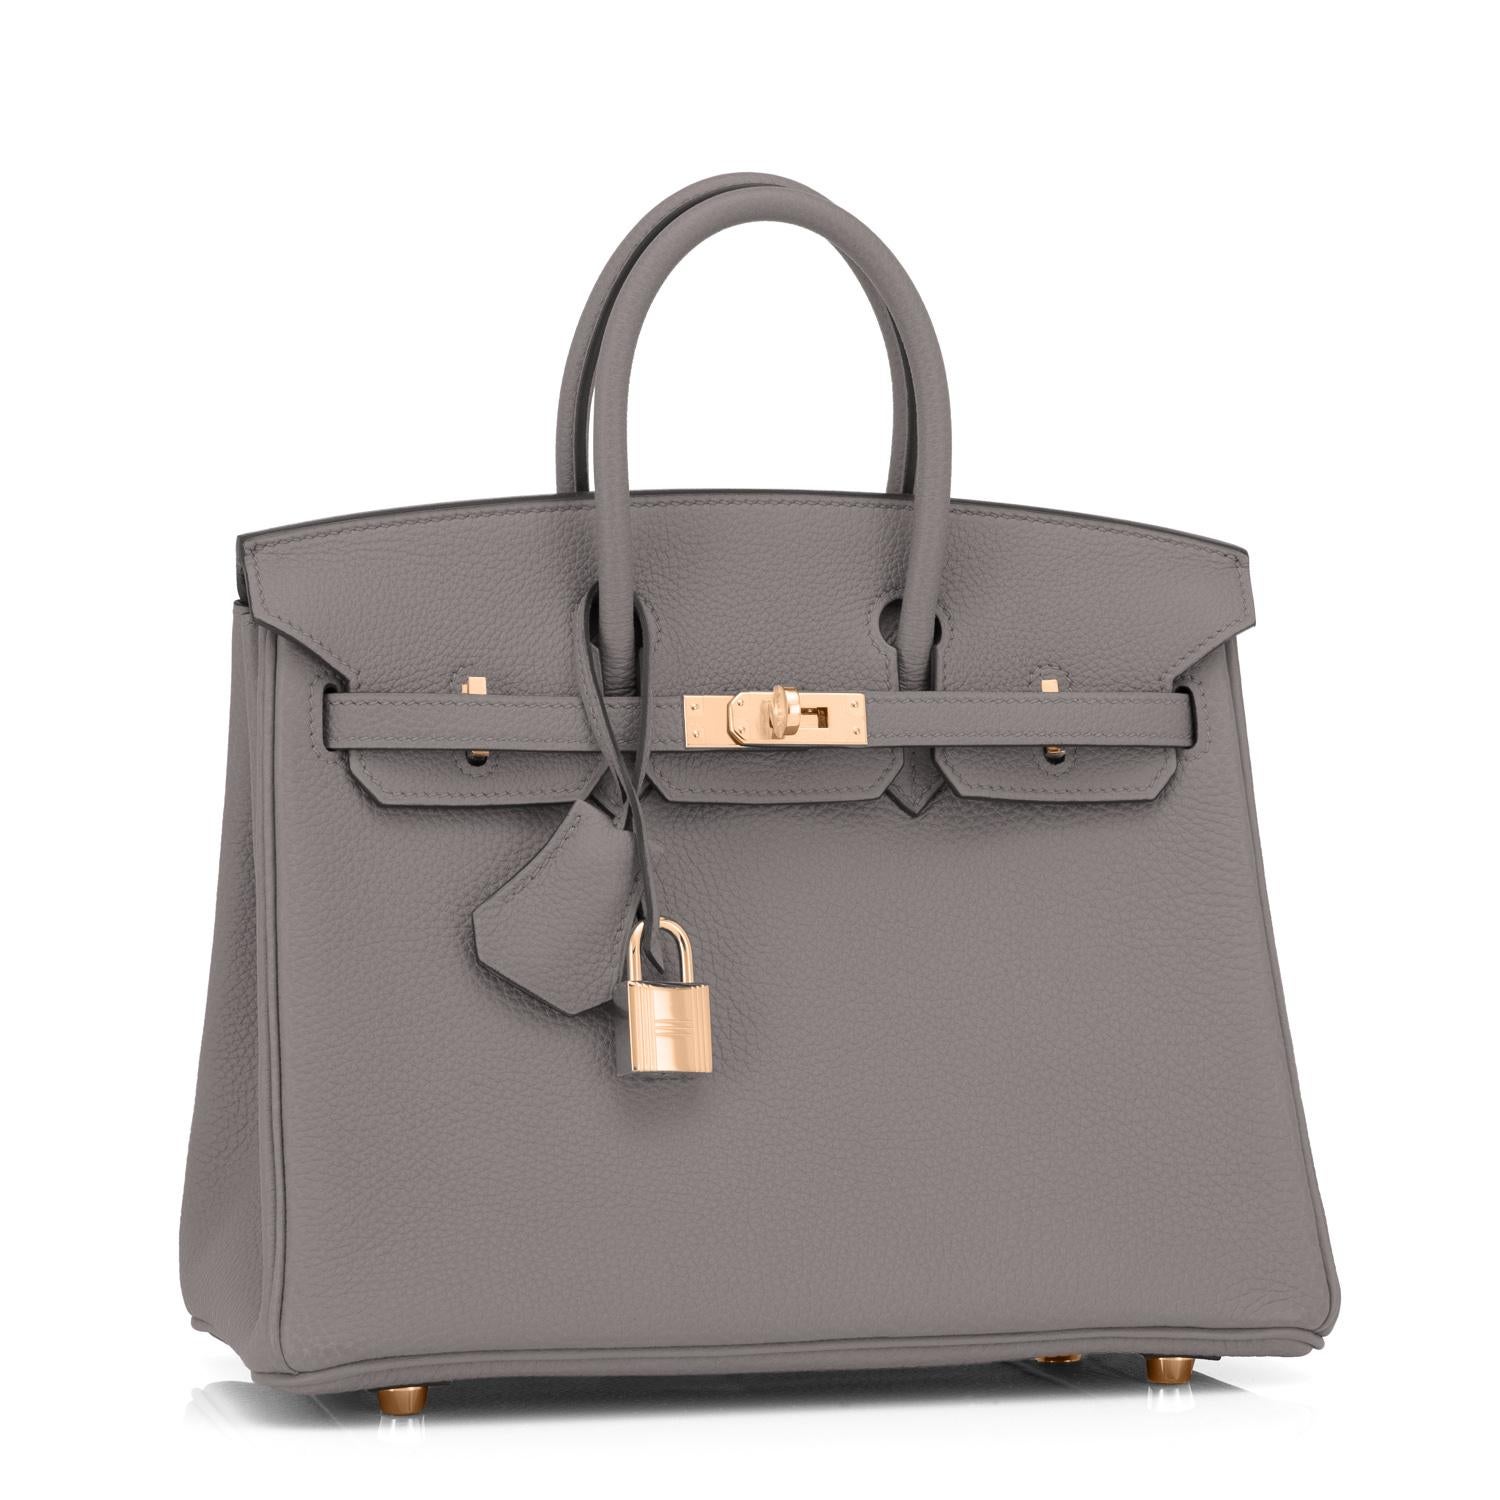 Bank Wire Price ONLY! 
Hermes Birkin 25cm Etain Tin Grey Rose Gold Hardware Bag Z Stamp, 2021
Just purchased from Hermes store; bag bears new interior 2021 Z Stamp.
Brand New in Box. Store fresh. Pristine Condition (with plastic on hardware)
Perfect